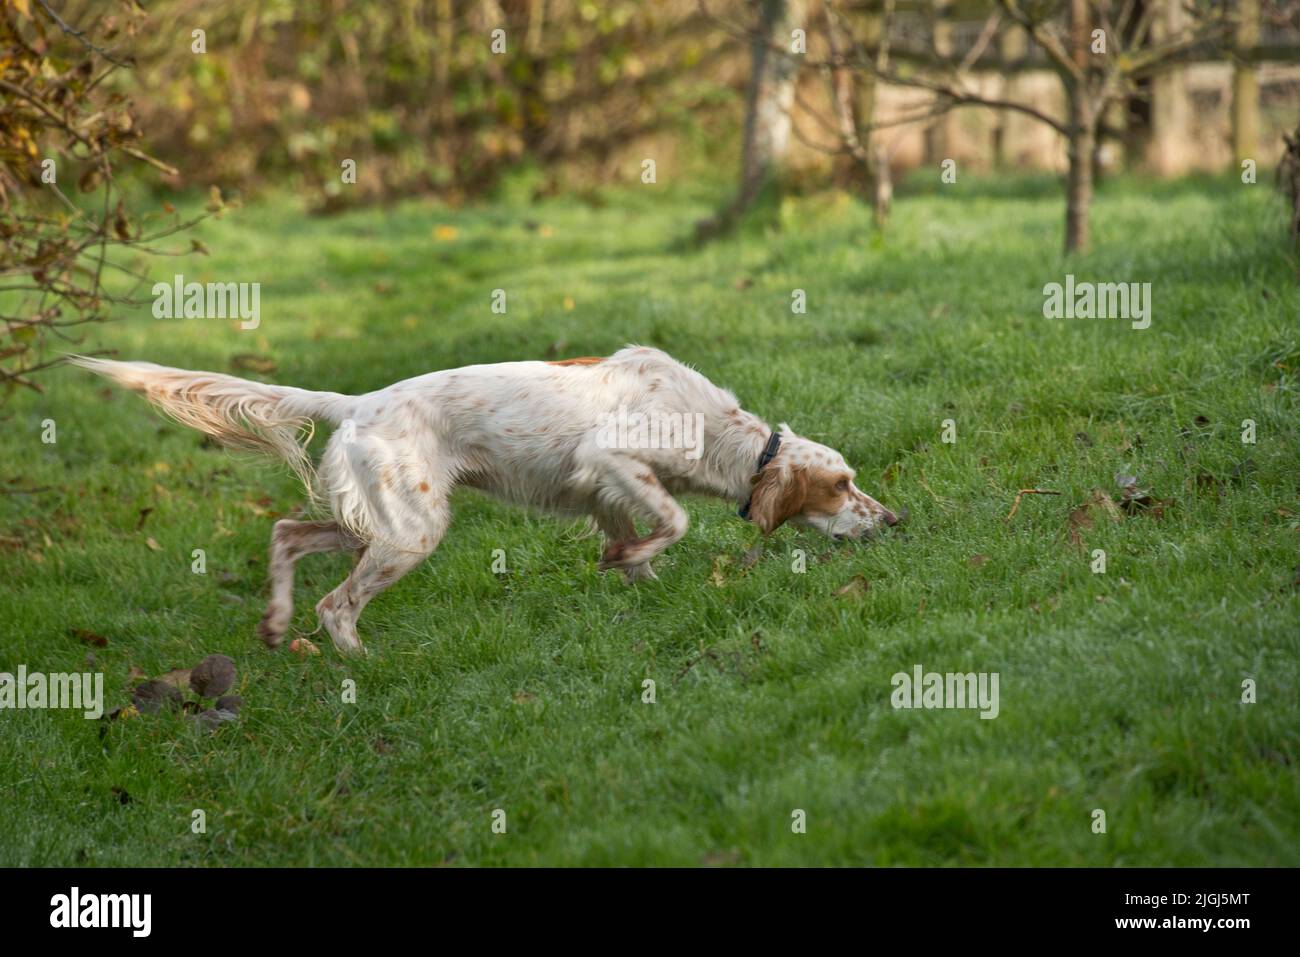 English setter dog with her nose down smelling the grass for game or prey, body tense and tail wagging, Berkshire, November Stock Photo